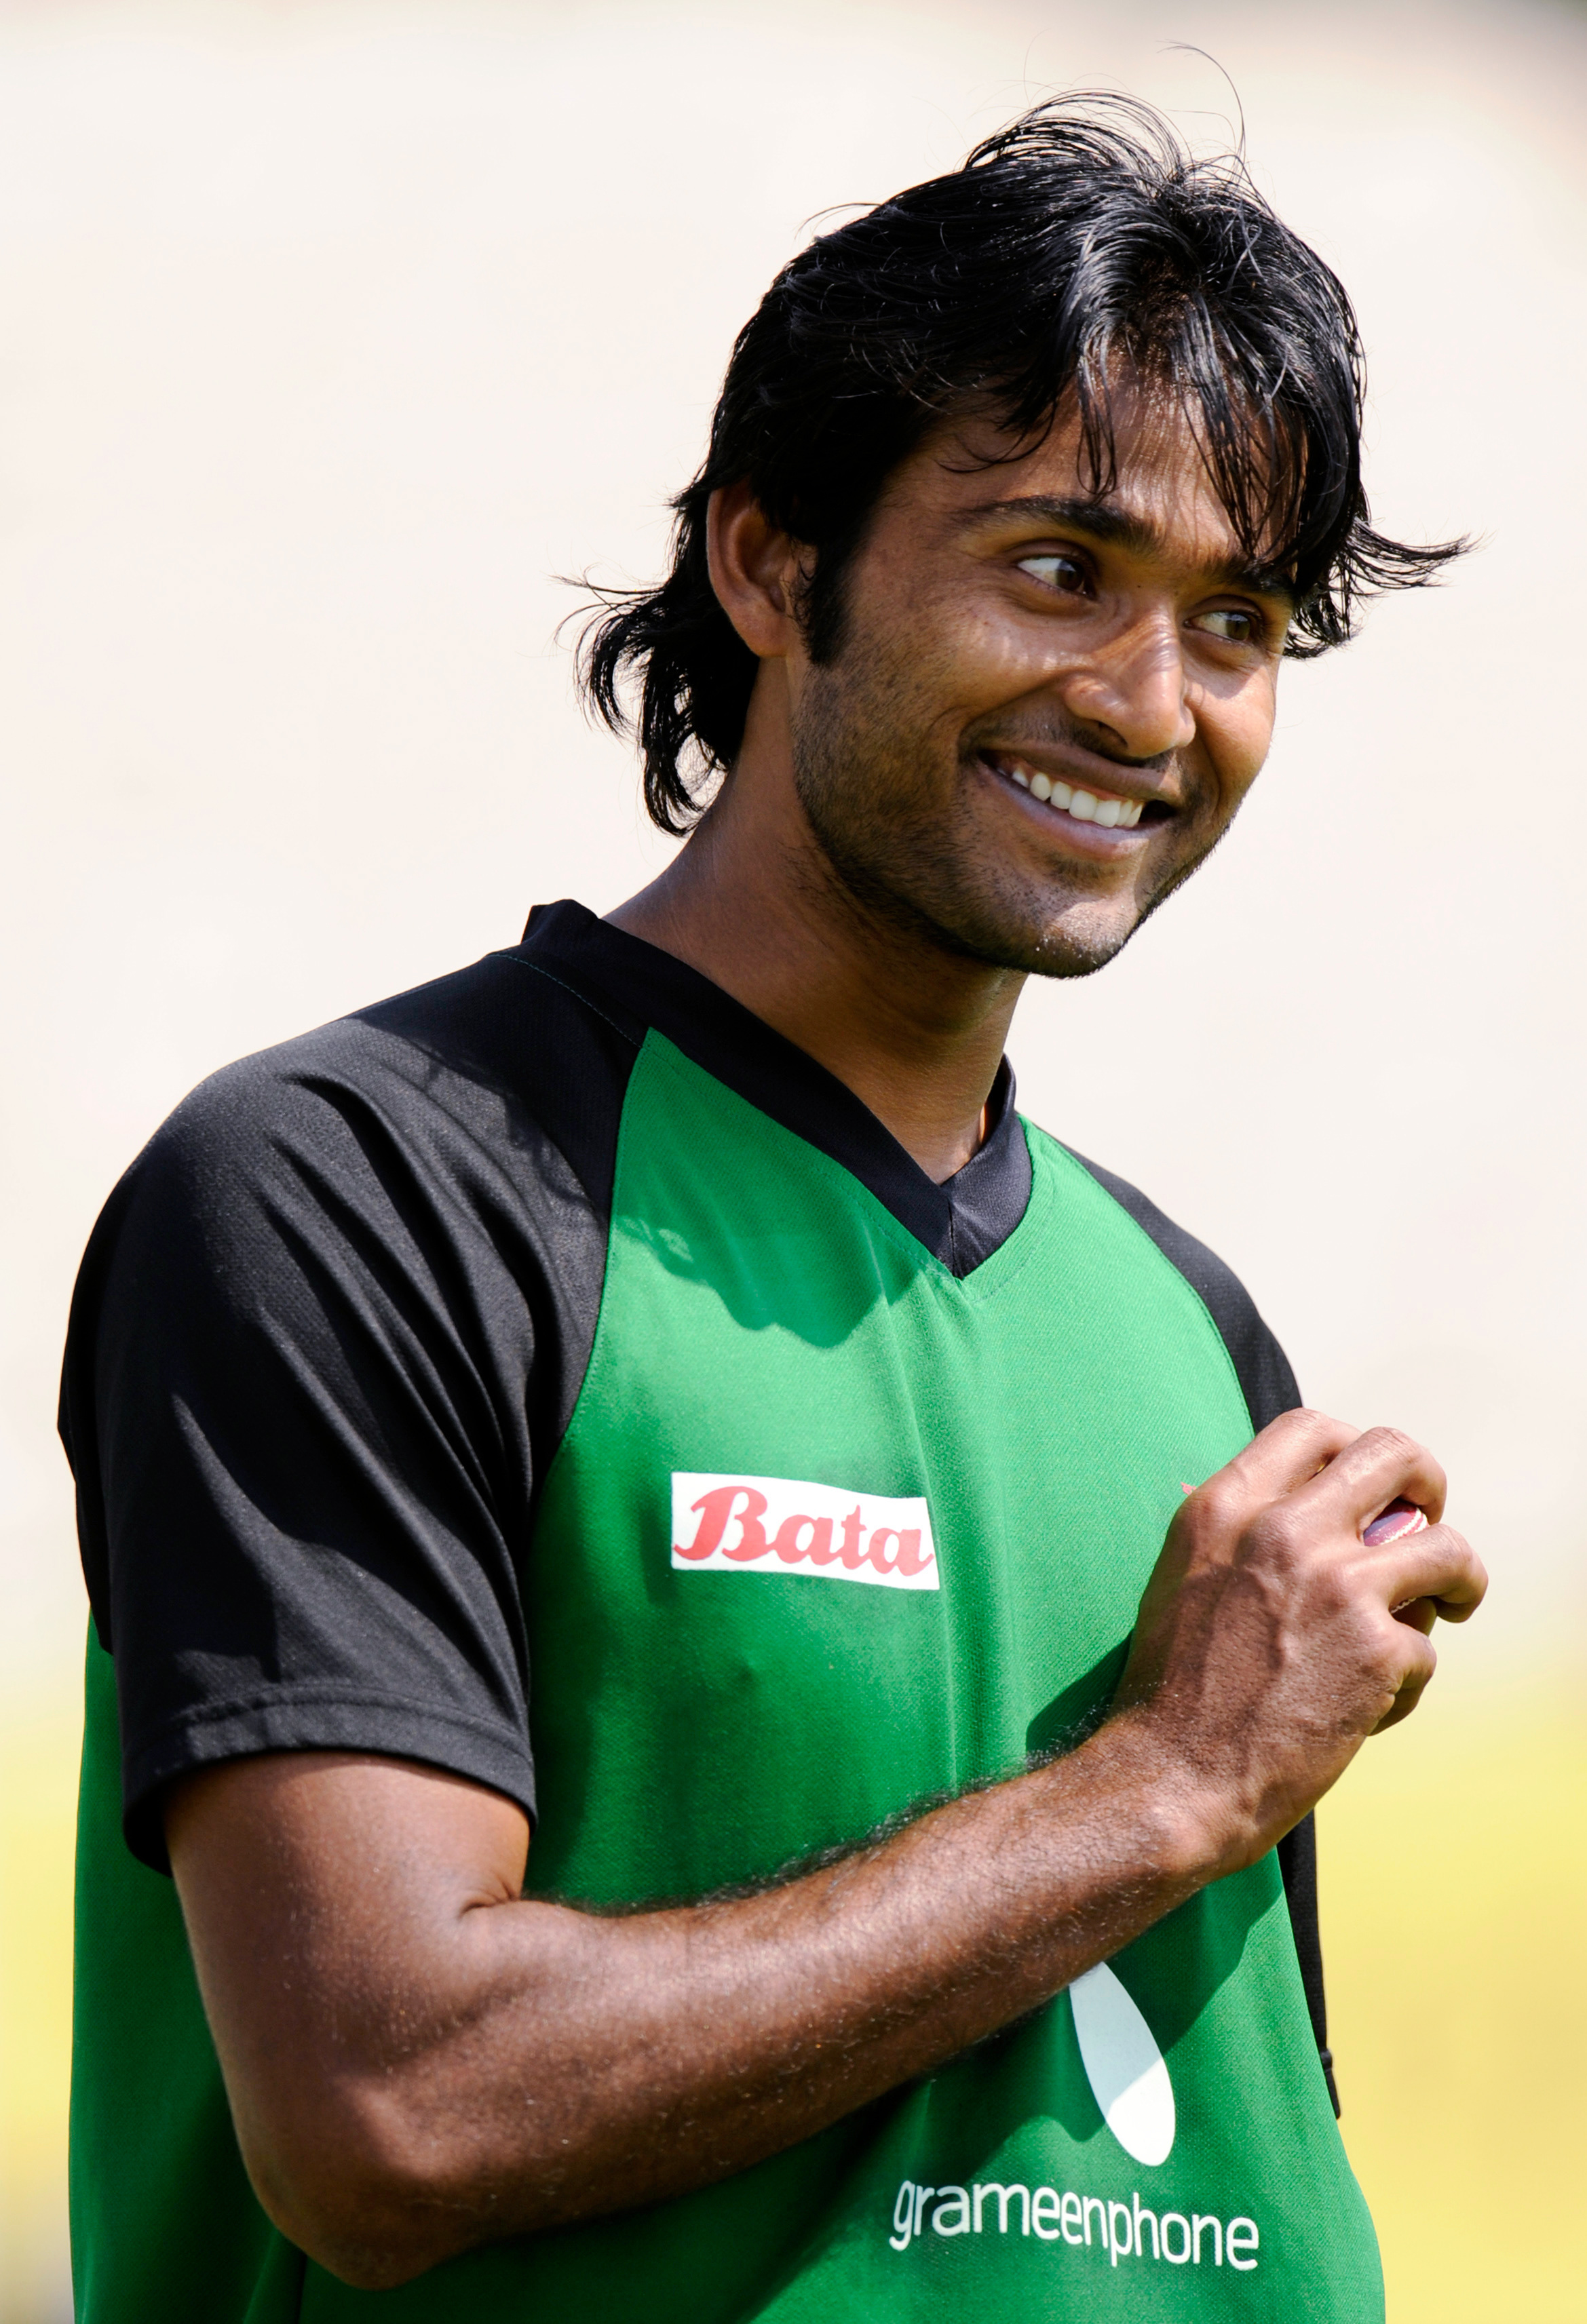 Bangladesh's Shahadat Hossain looks on during a training session before the second cricket test match against England at Old Trafford cricket ground in Manchester June 3, 2010. (Philip Brown—Reuters)